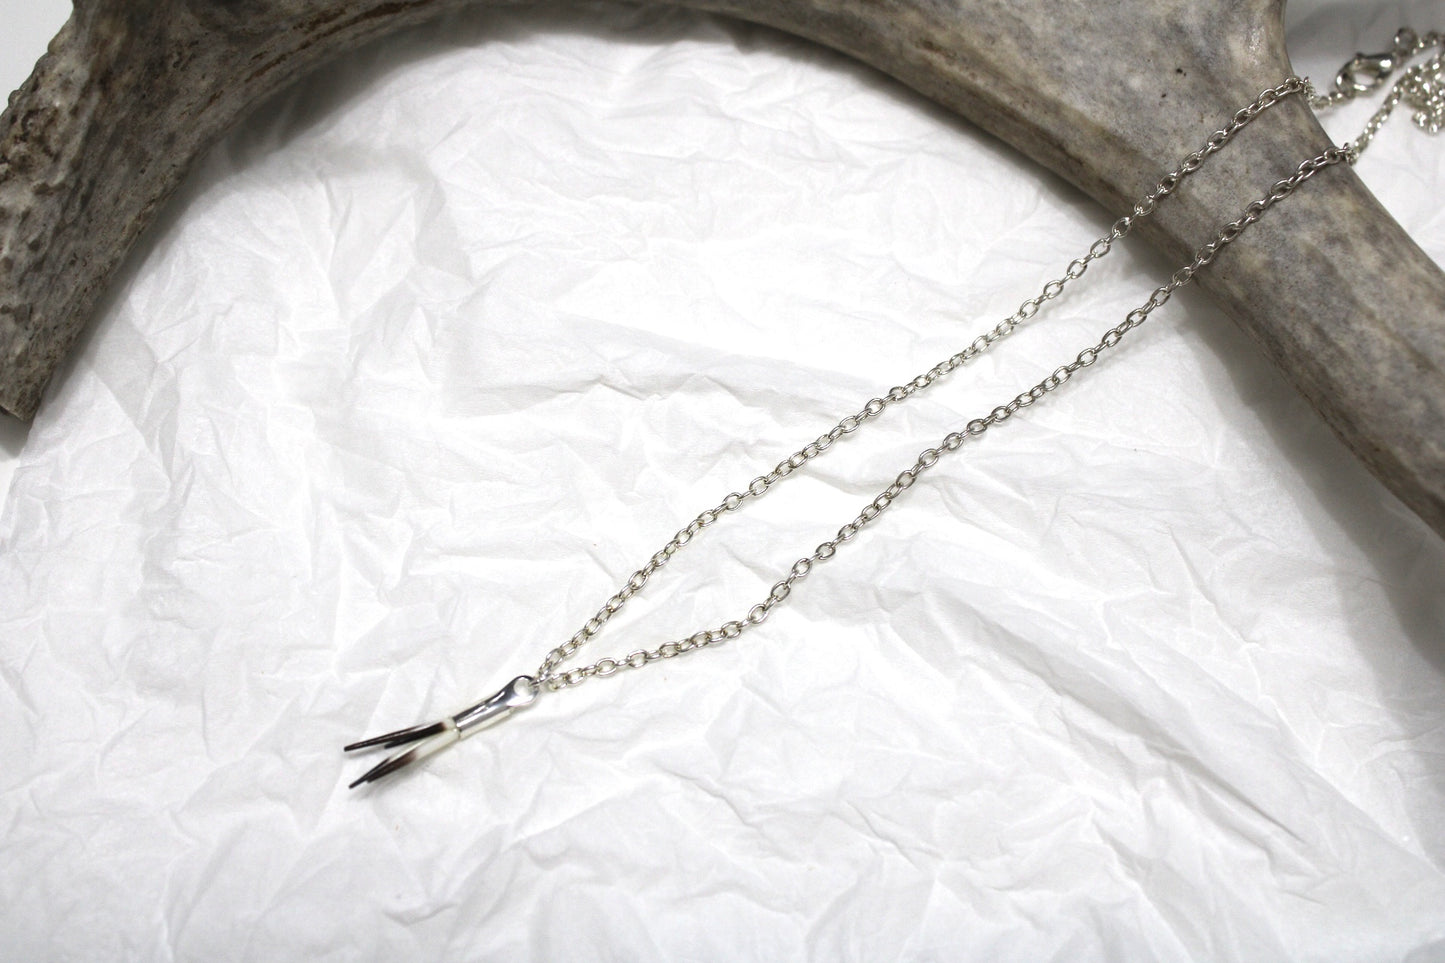 Porcupine Quill necklace